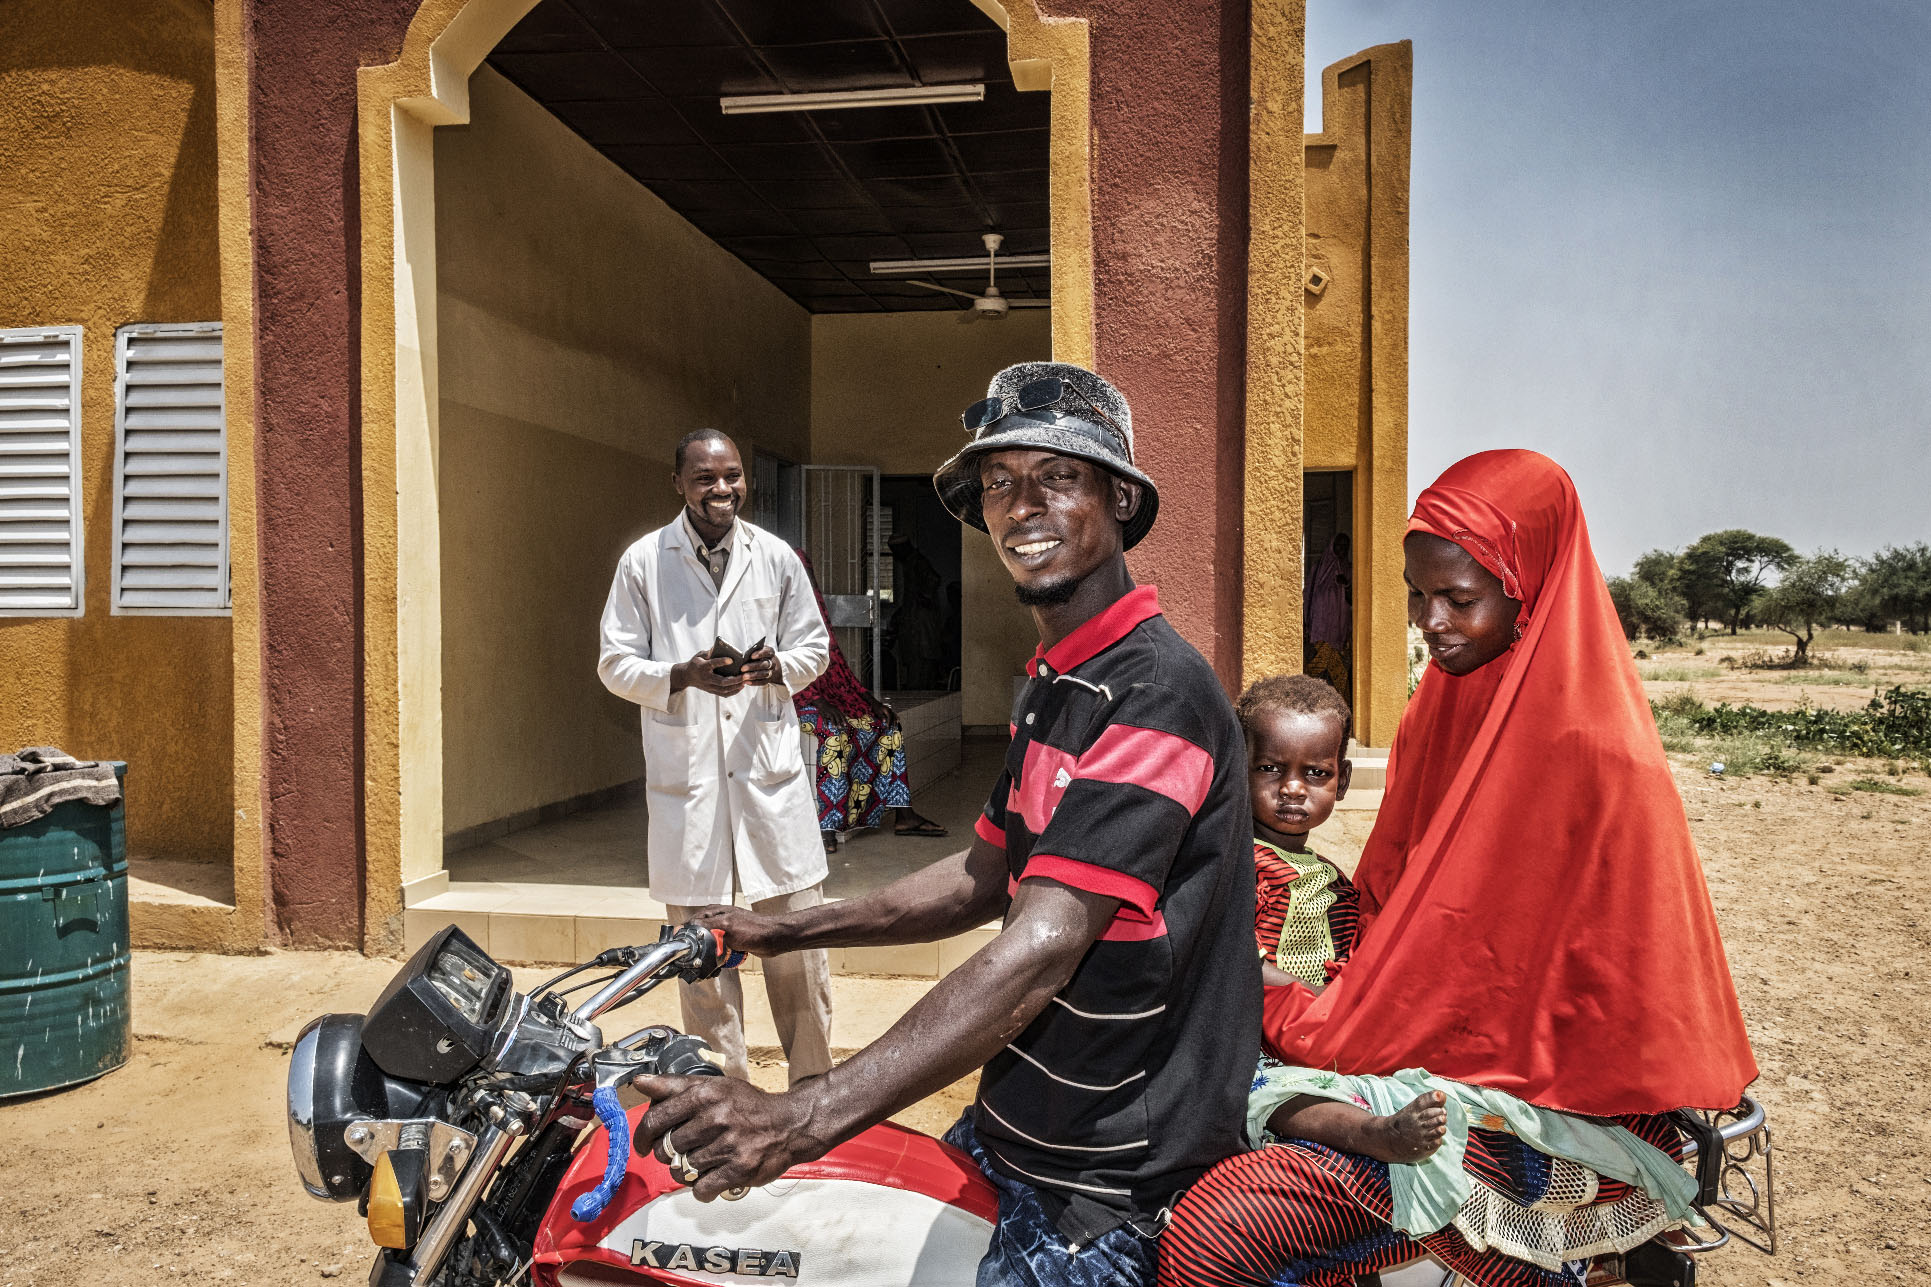 A hospital in Niger. Doctor standing outside the facility, while a woman and man arrive on a motorcycle with their baby.